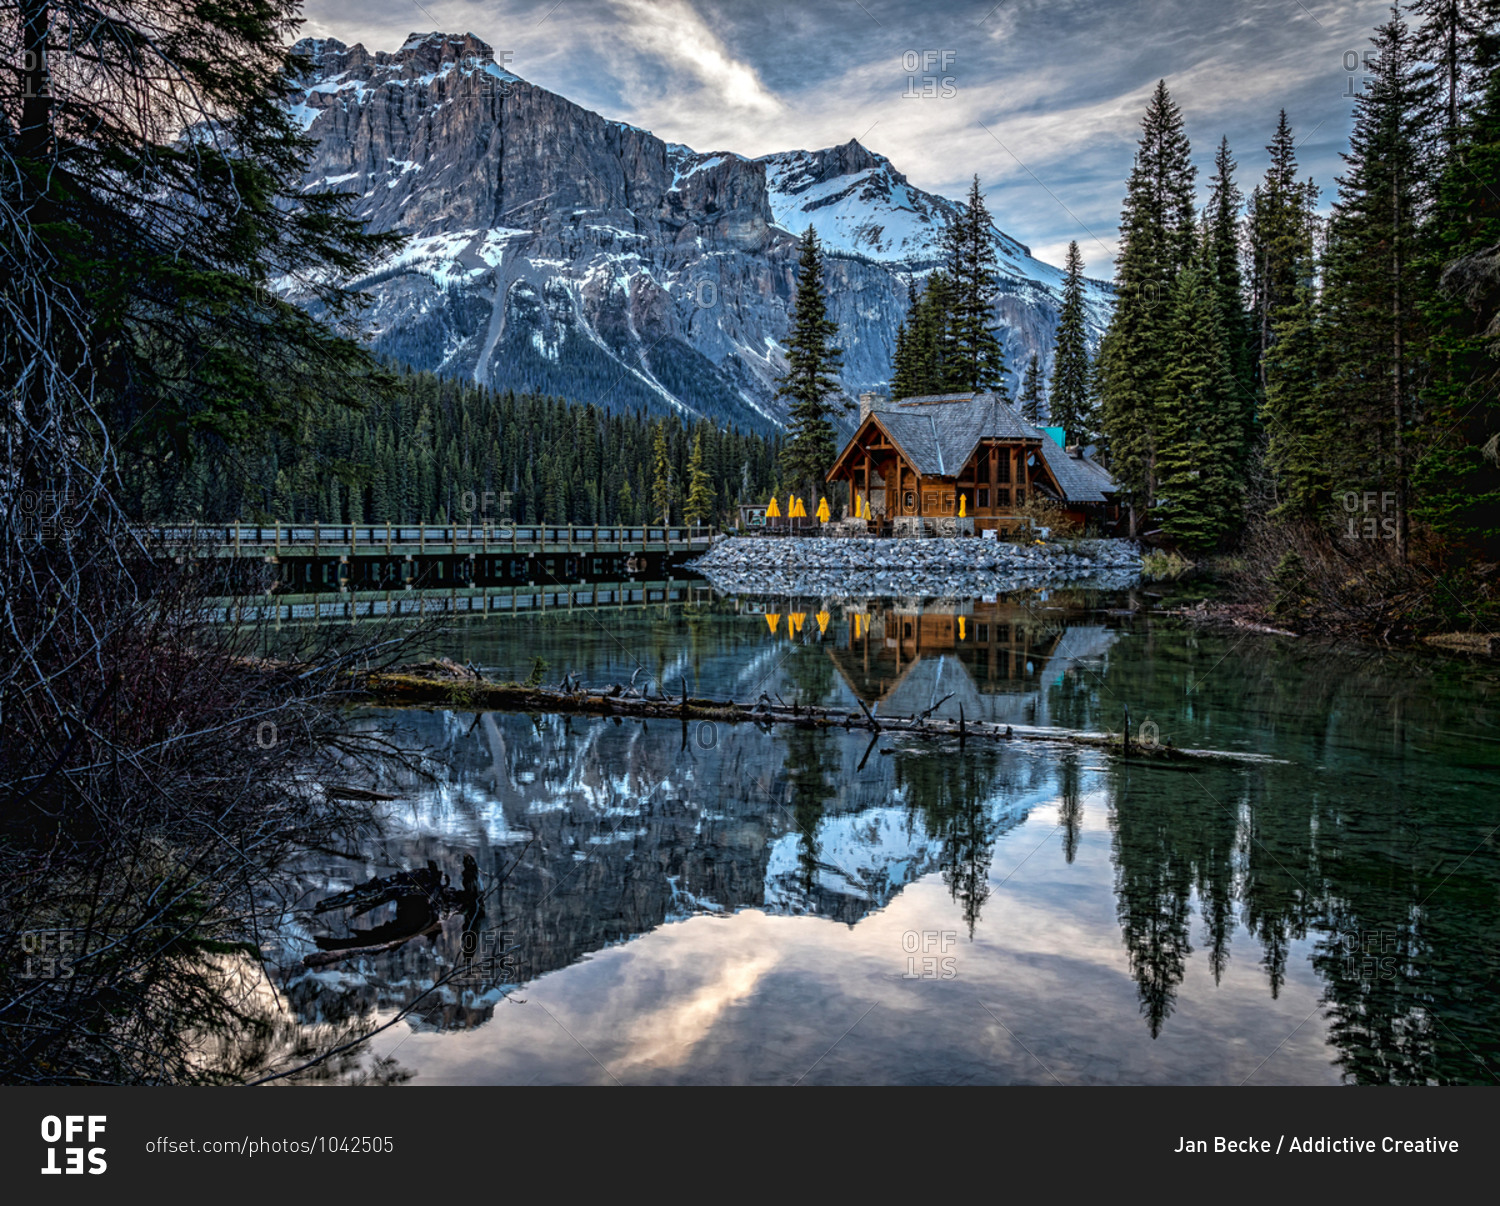 Magnificent scenery of Emerald Lake with bridge over water and wooden house on shore surrounded by green pine forest against rocky mountains covered with snow in Yoho National Park in Canada